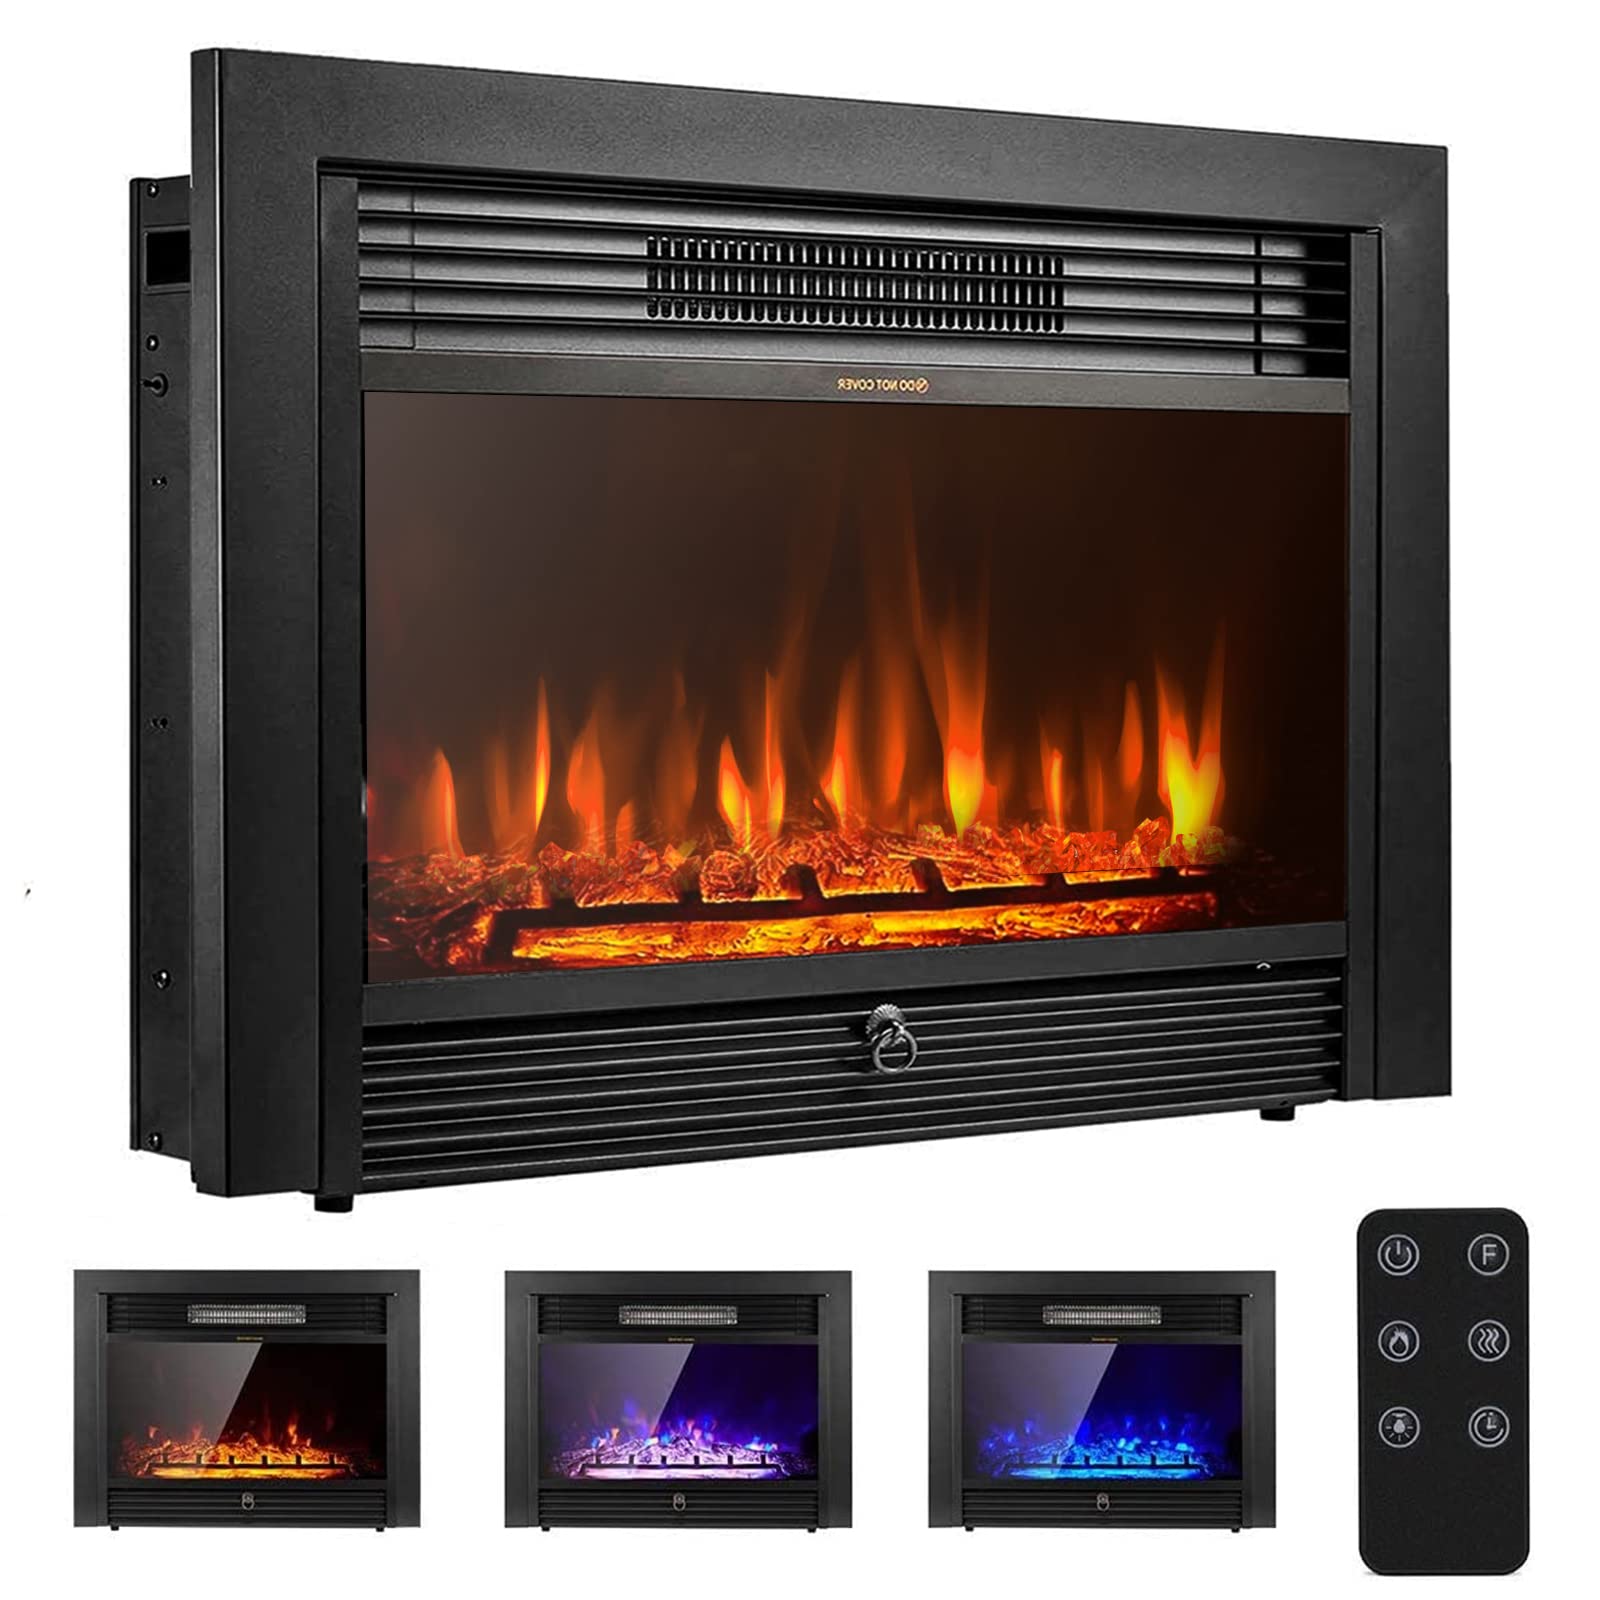 YODOLLA 28.5" Electric Fireplace Insert with 3 Color Flames, Fireplace Heater with Remote Control and Timer, 750w-1500W,Classic 